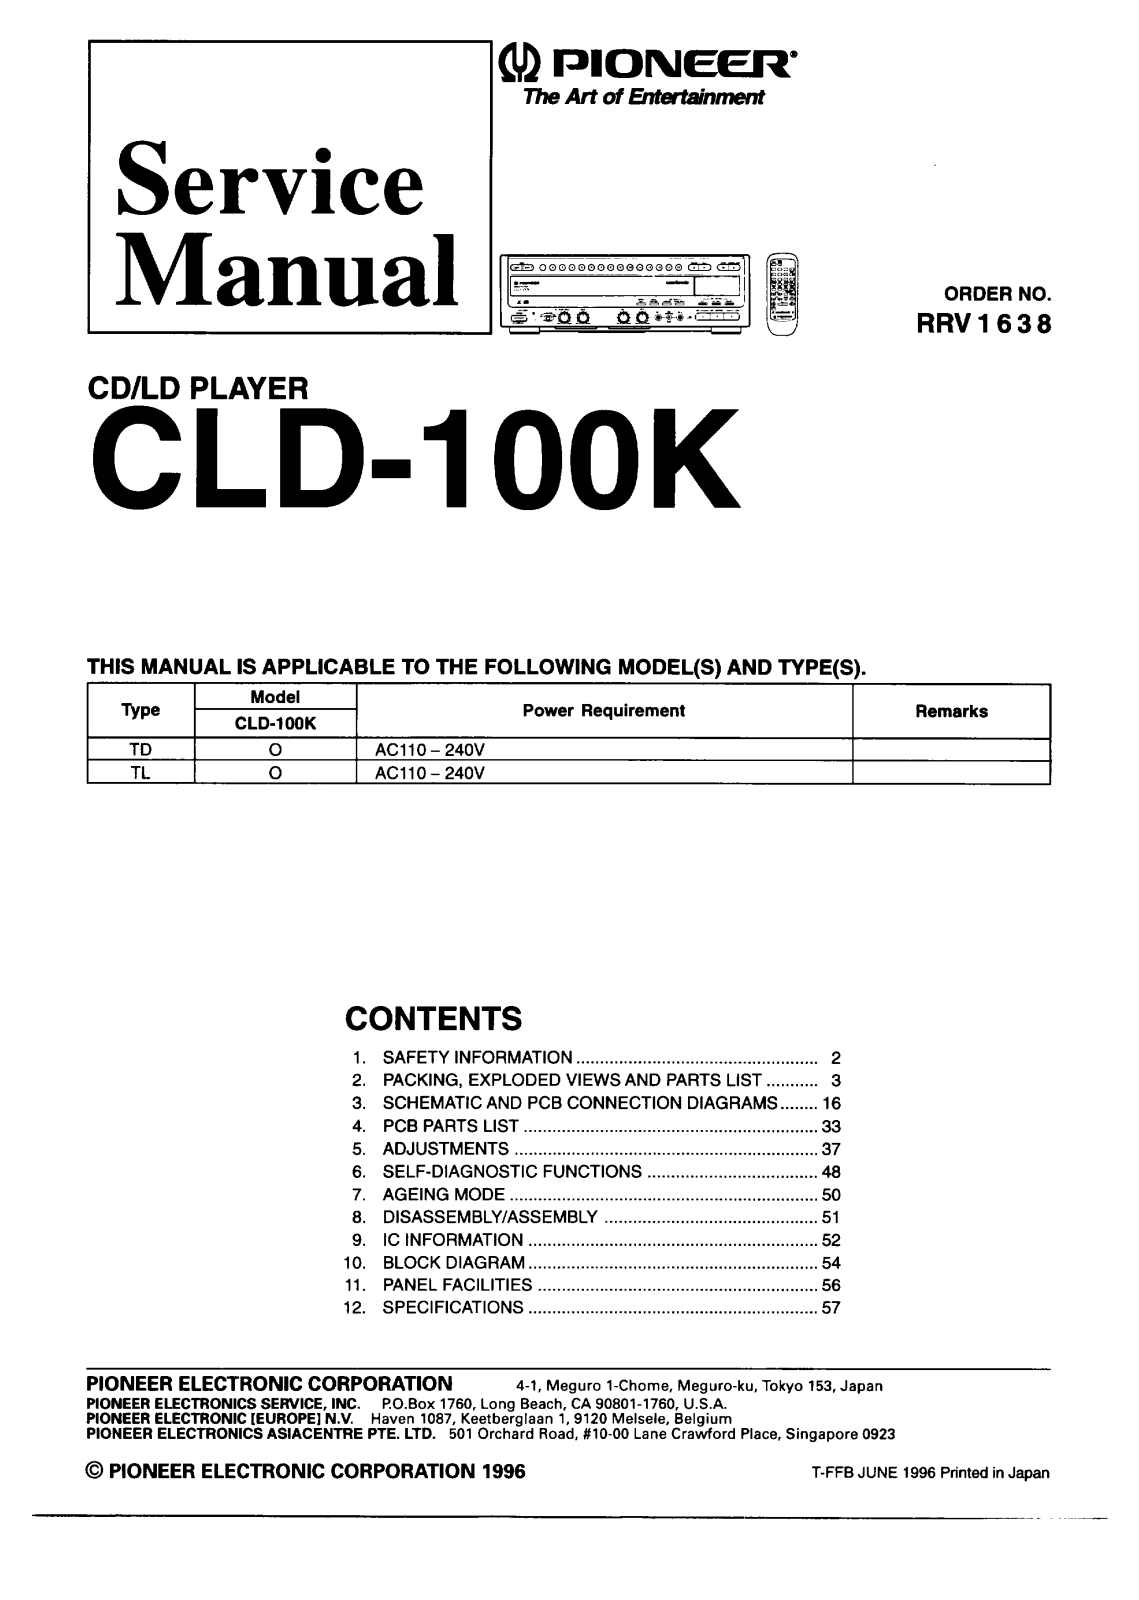 Pioneer CLD-100, CLD-100-K Service manual